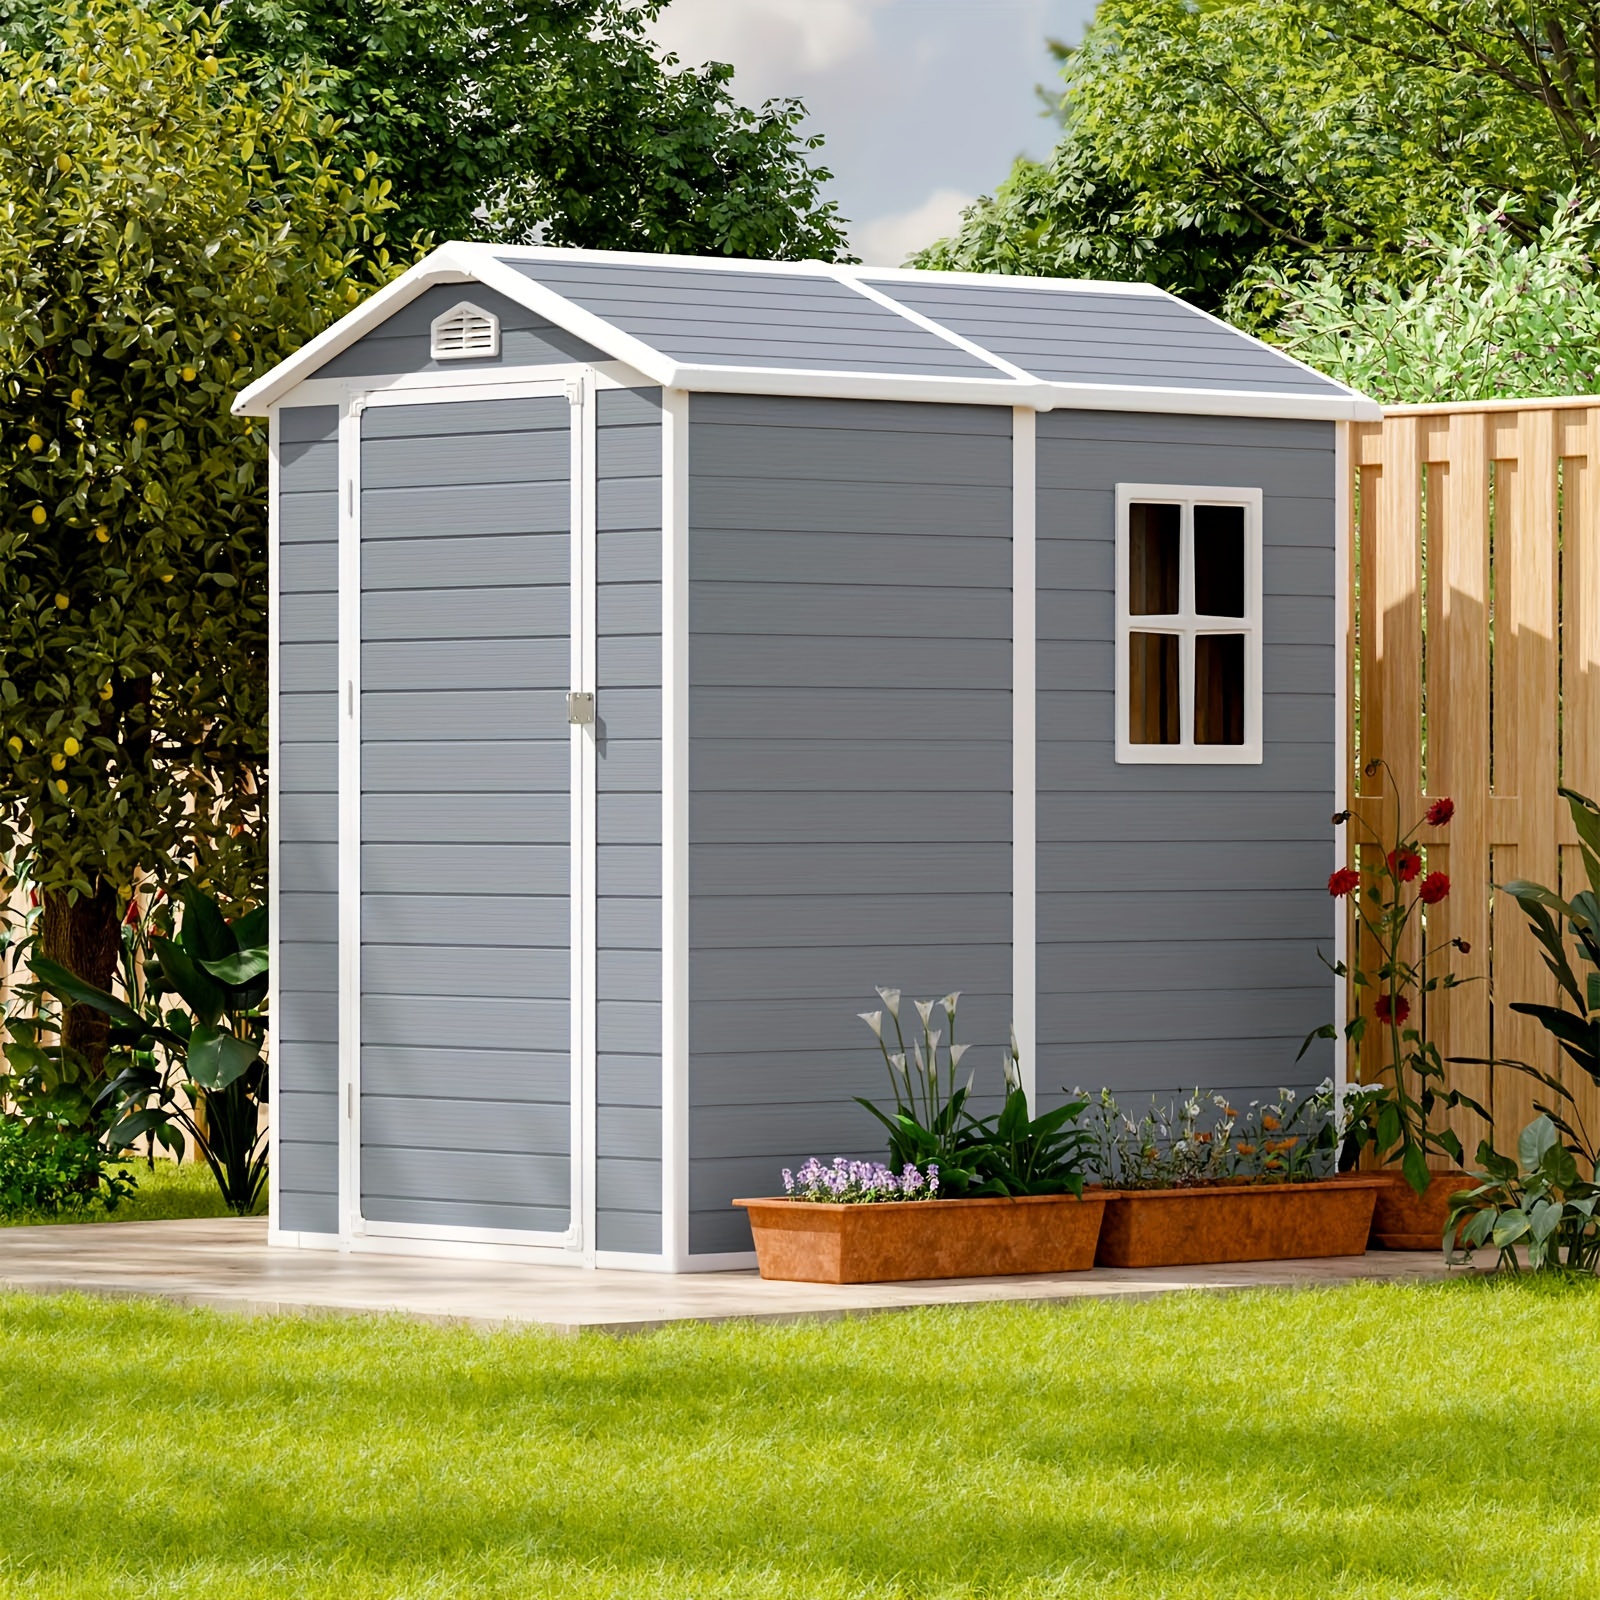 

6' X 4' Plastic Outdoor Storage Shed With Reinforced Floor, Resin Outside Tool Shed With Windows And Lockable Doors For Backyard Garden Patio Lawn Seating & Booths&chairs